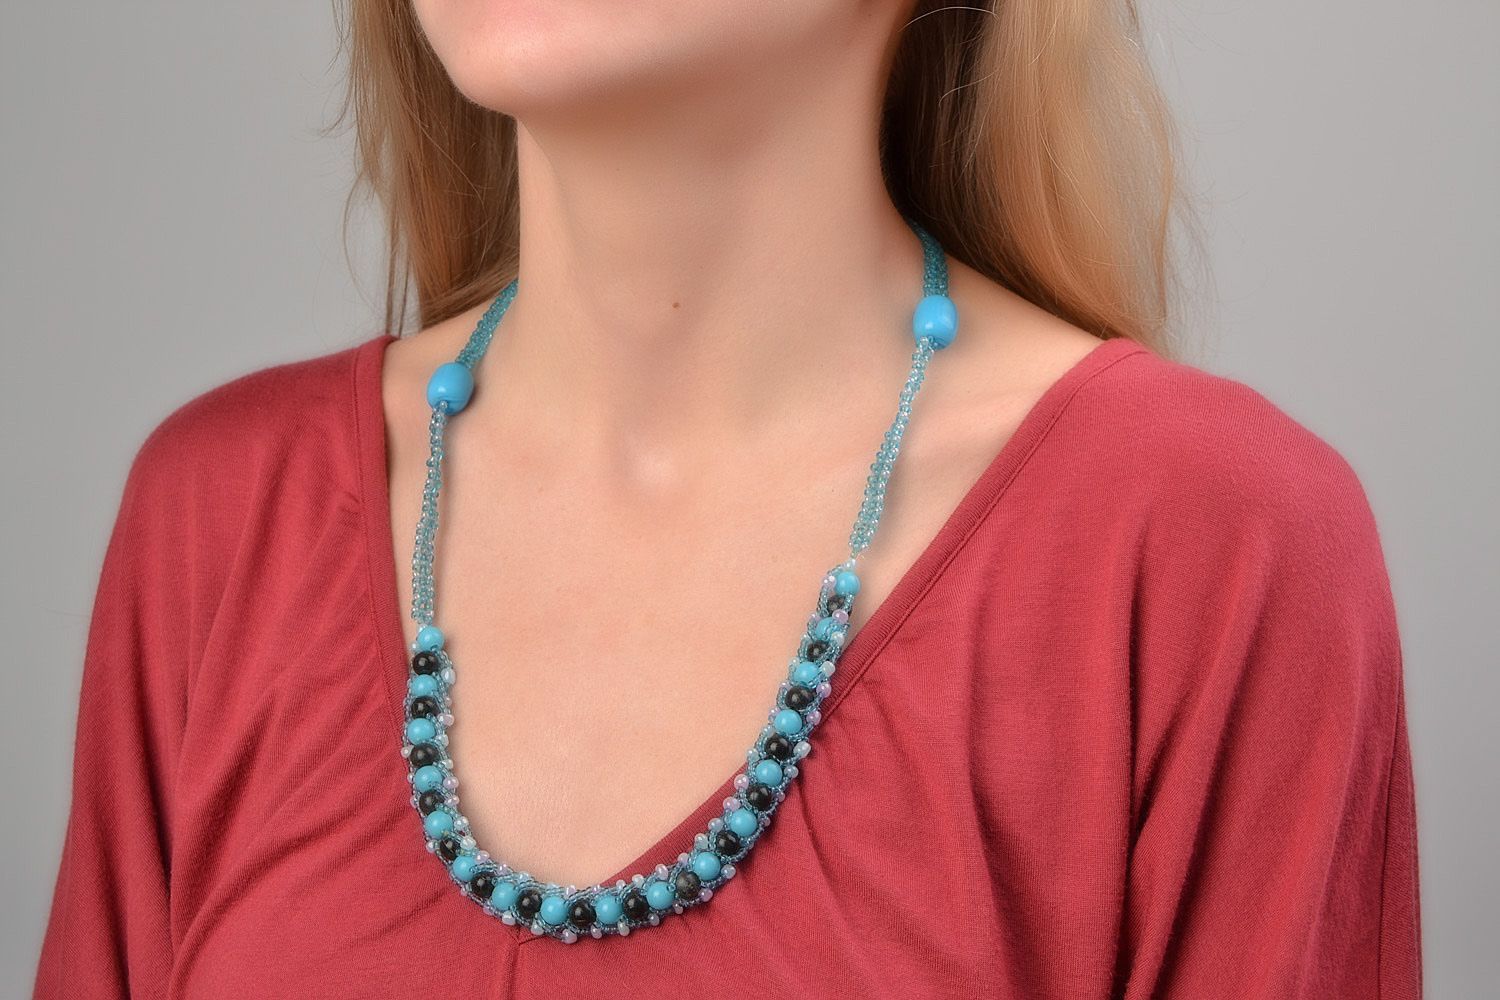 Handmade tender necklace with blue and black beads of different sizes for women photo 1